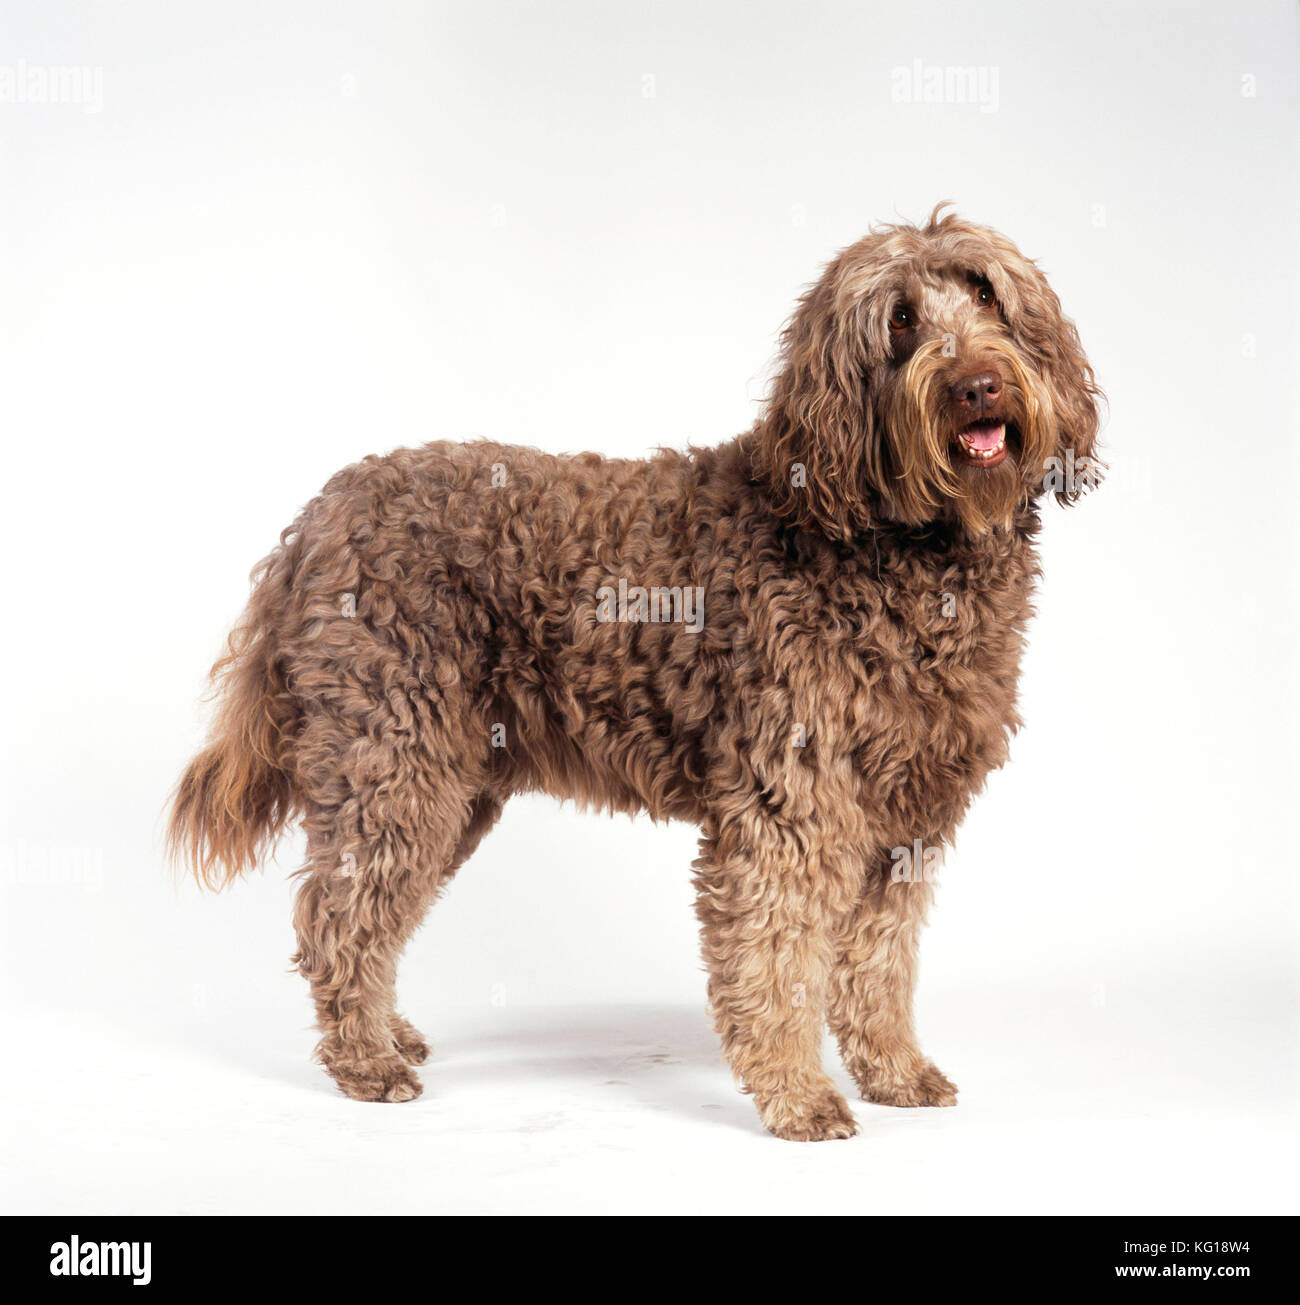 DOG - Labradoodle, standing, side view. A Labrador and Poodle cross. Stock Photo